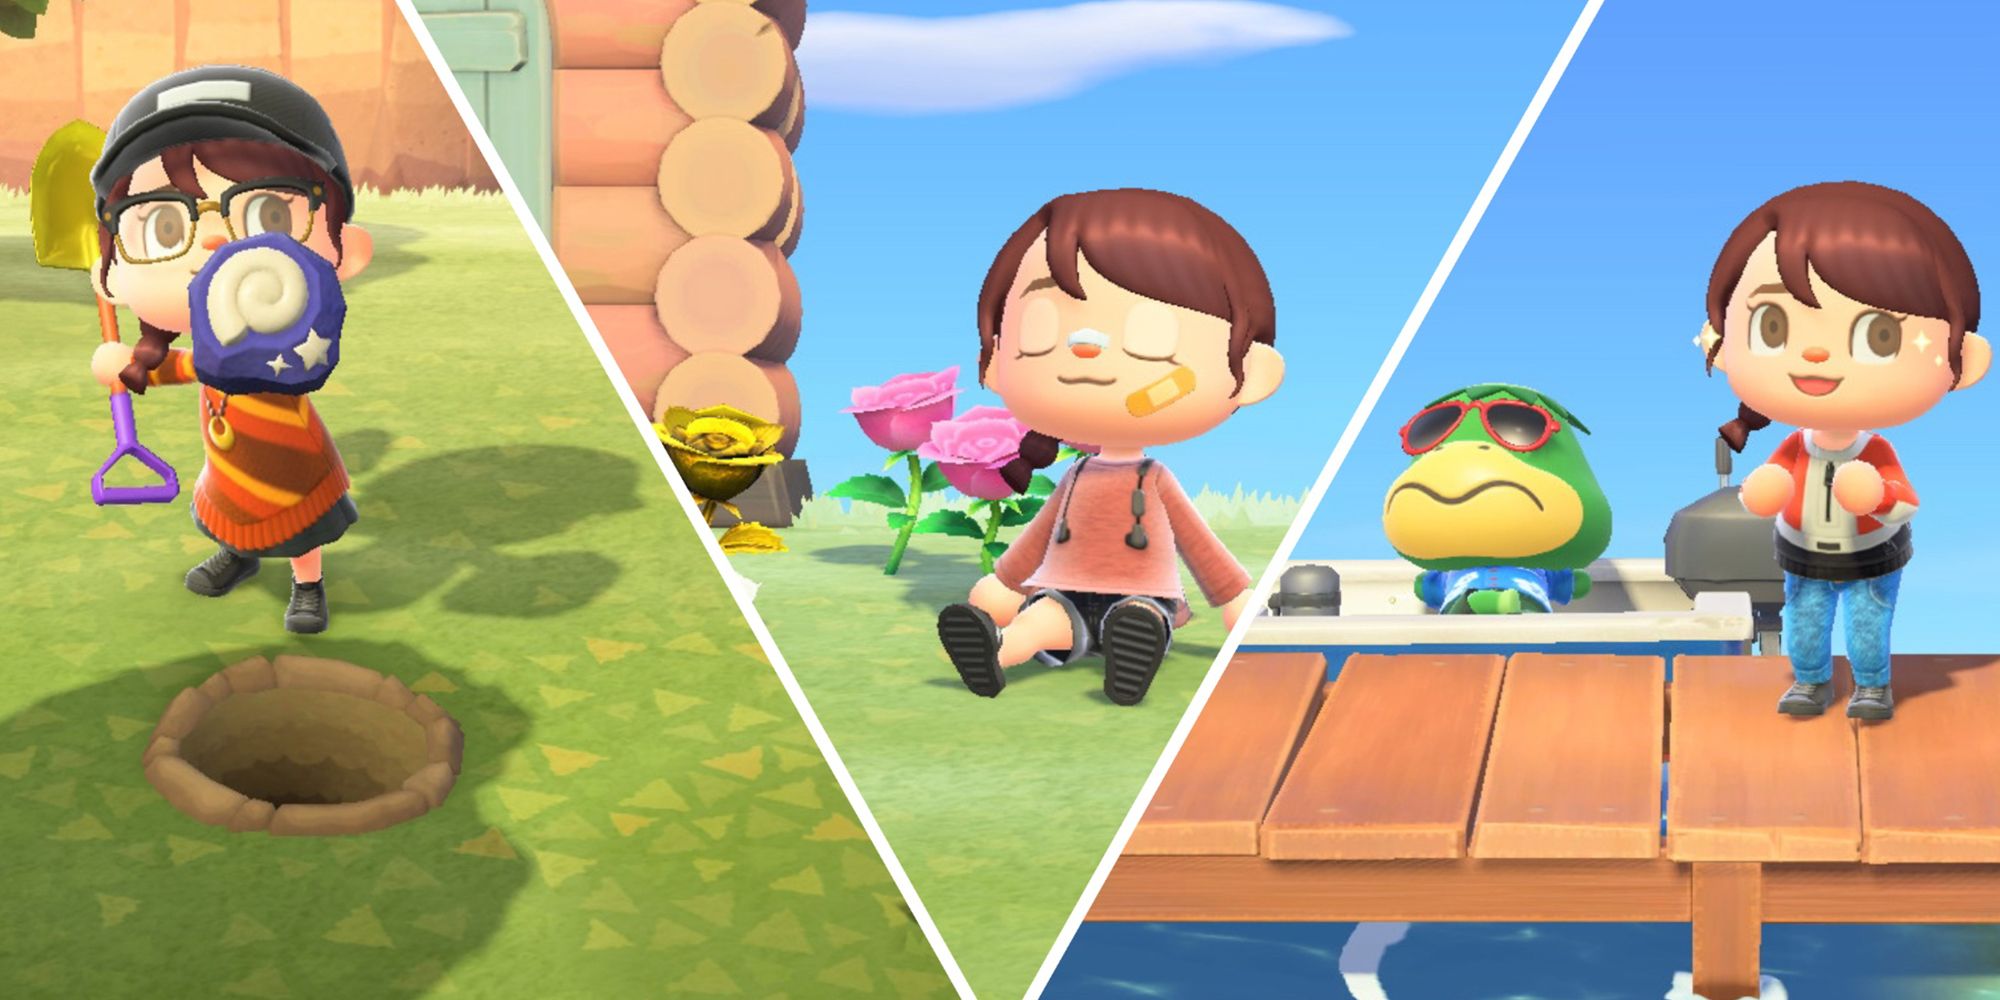 From left to right, a villager digging up a fossil, a villagers sitting with roses, and a villager posing with Kapp'n